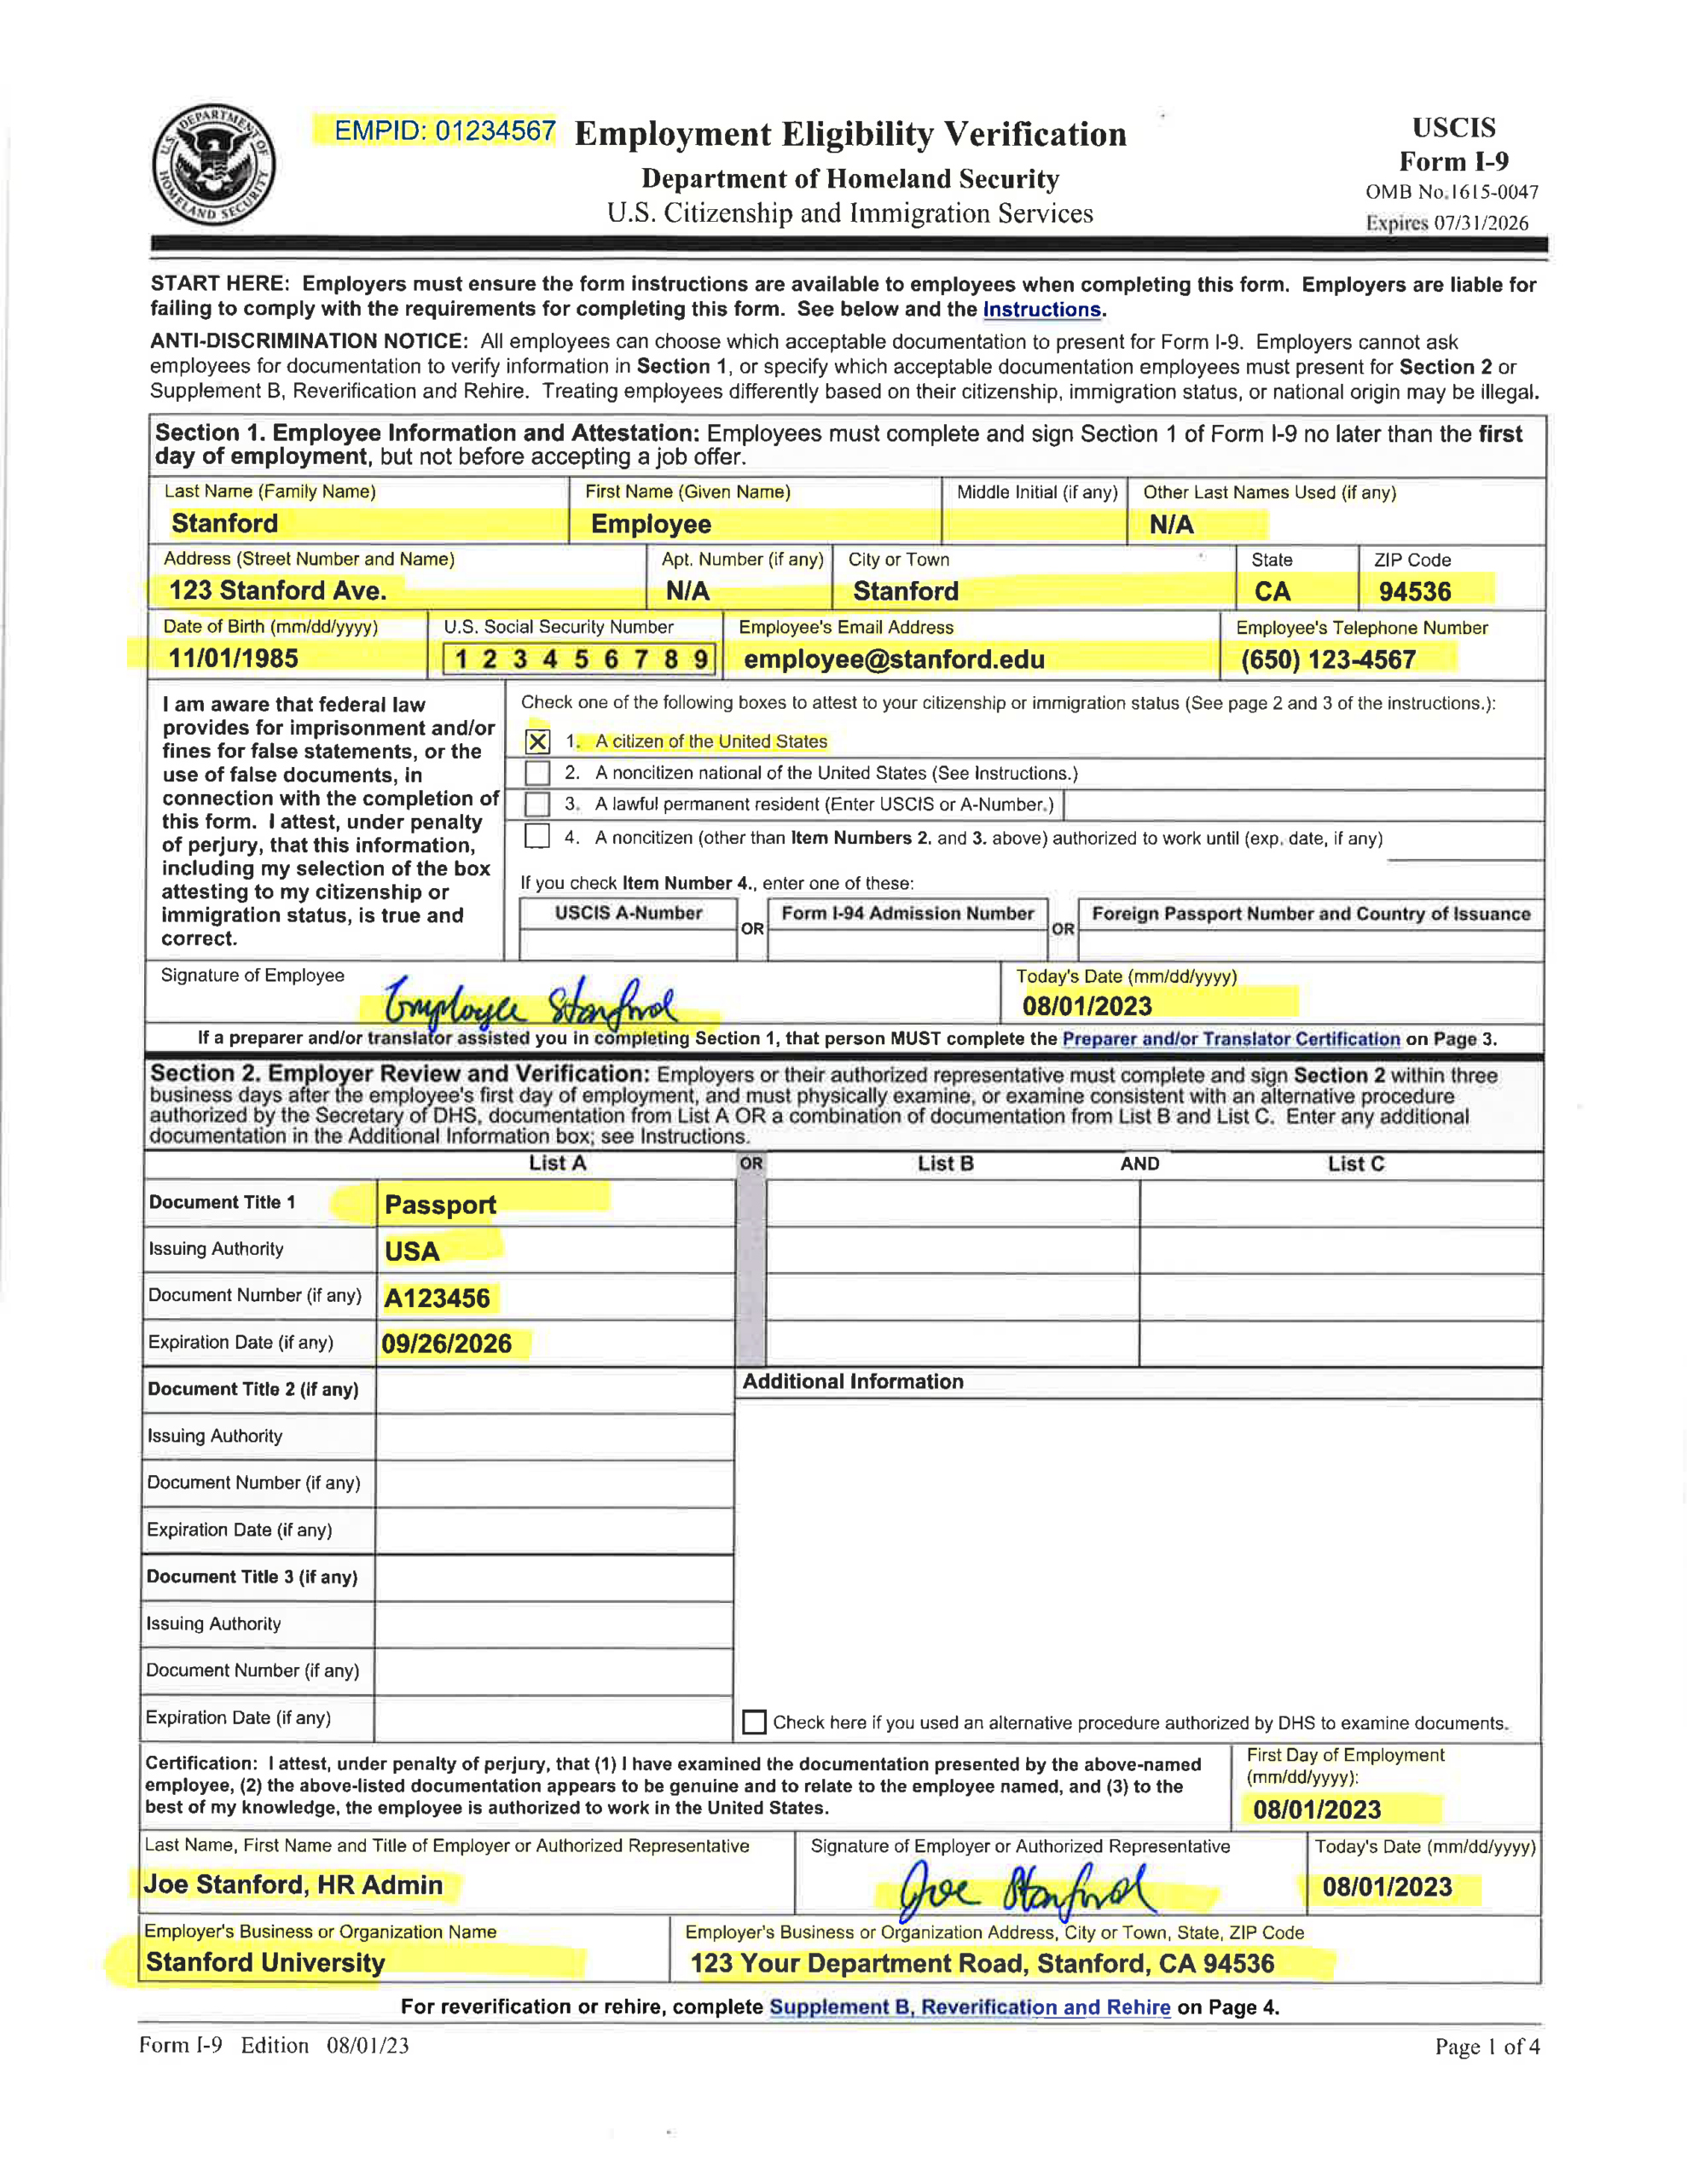 Examples Of Completed Form I-9 For Stanford regarding Uscis I9 Form Requirements